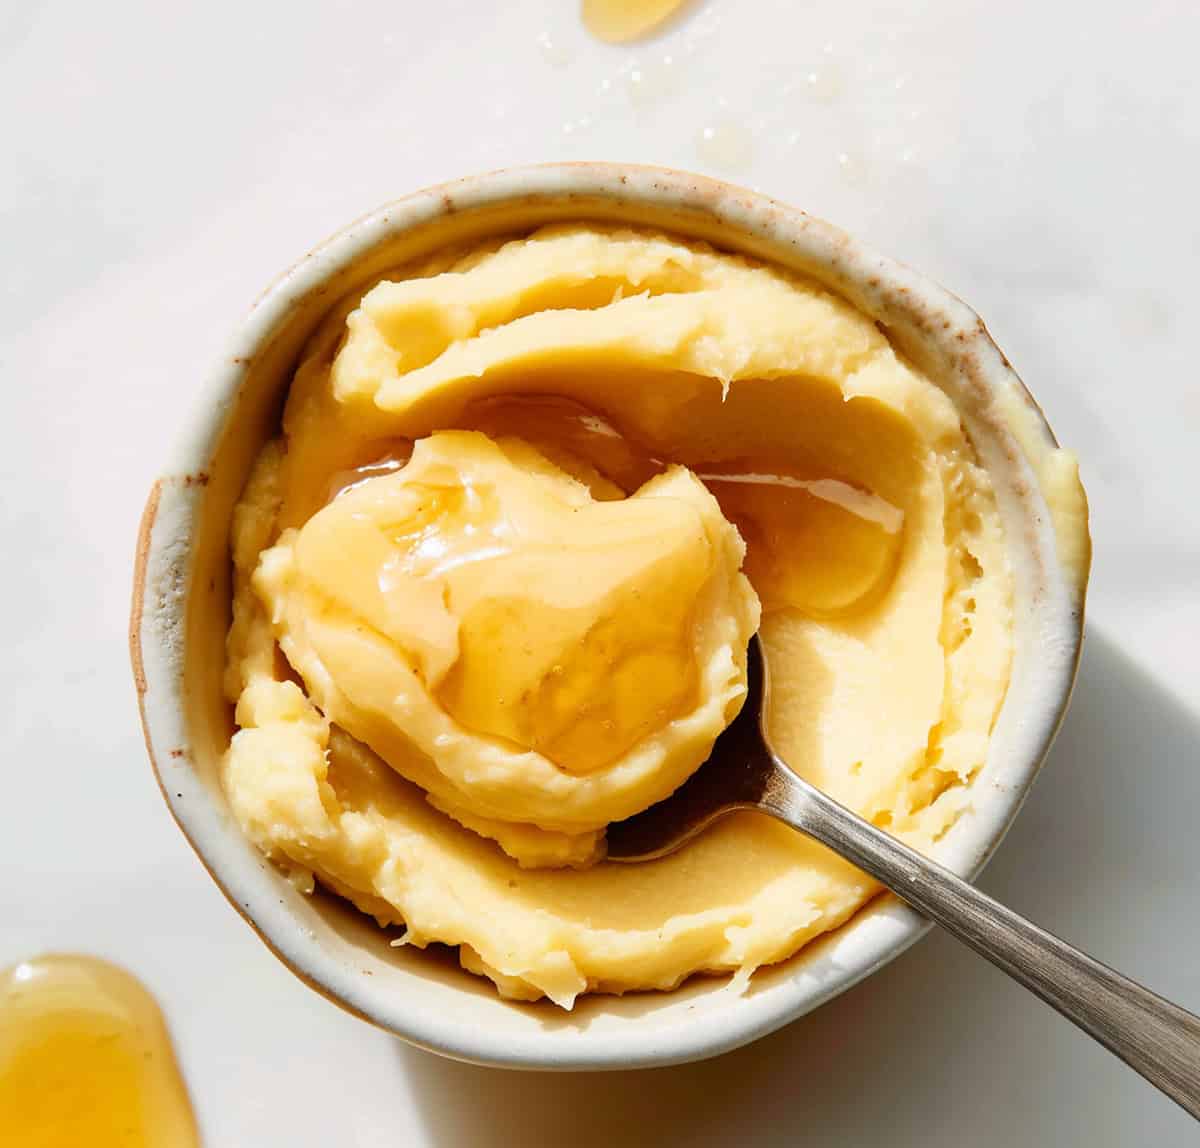 Bowl of honey butter with a spoon.